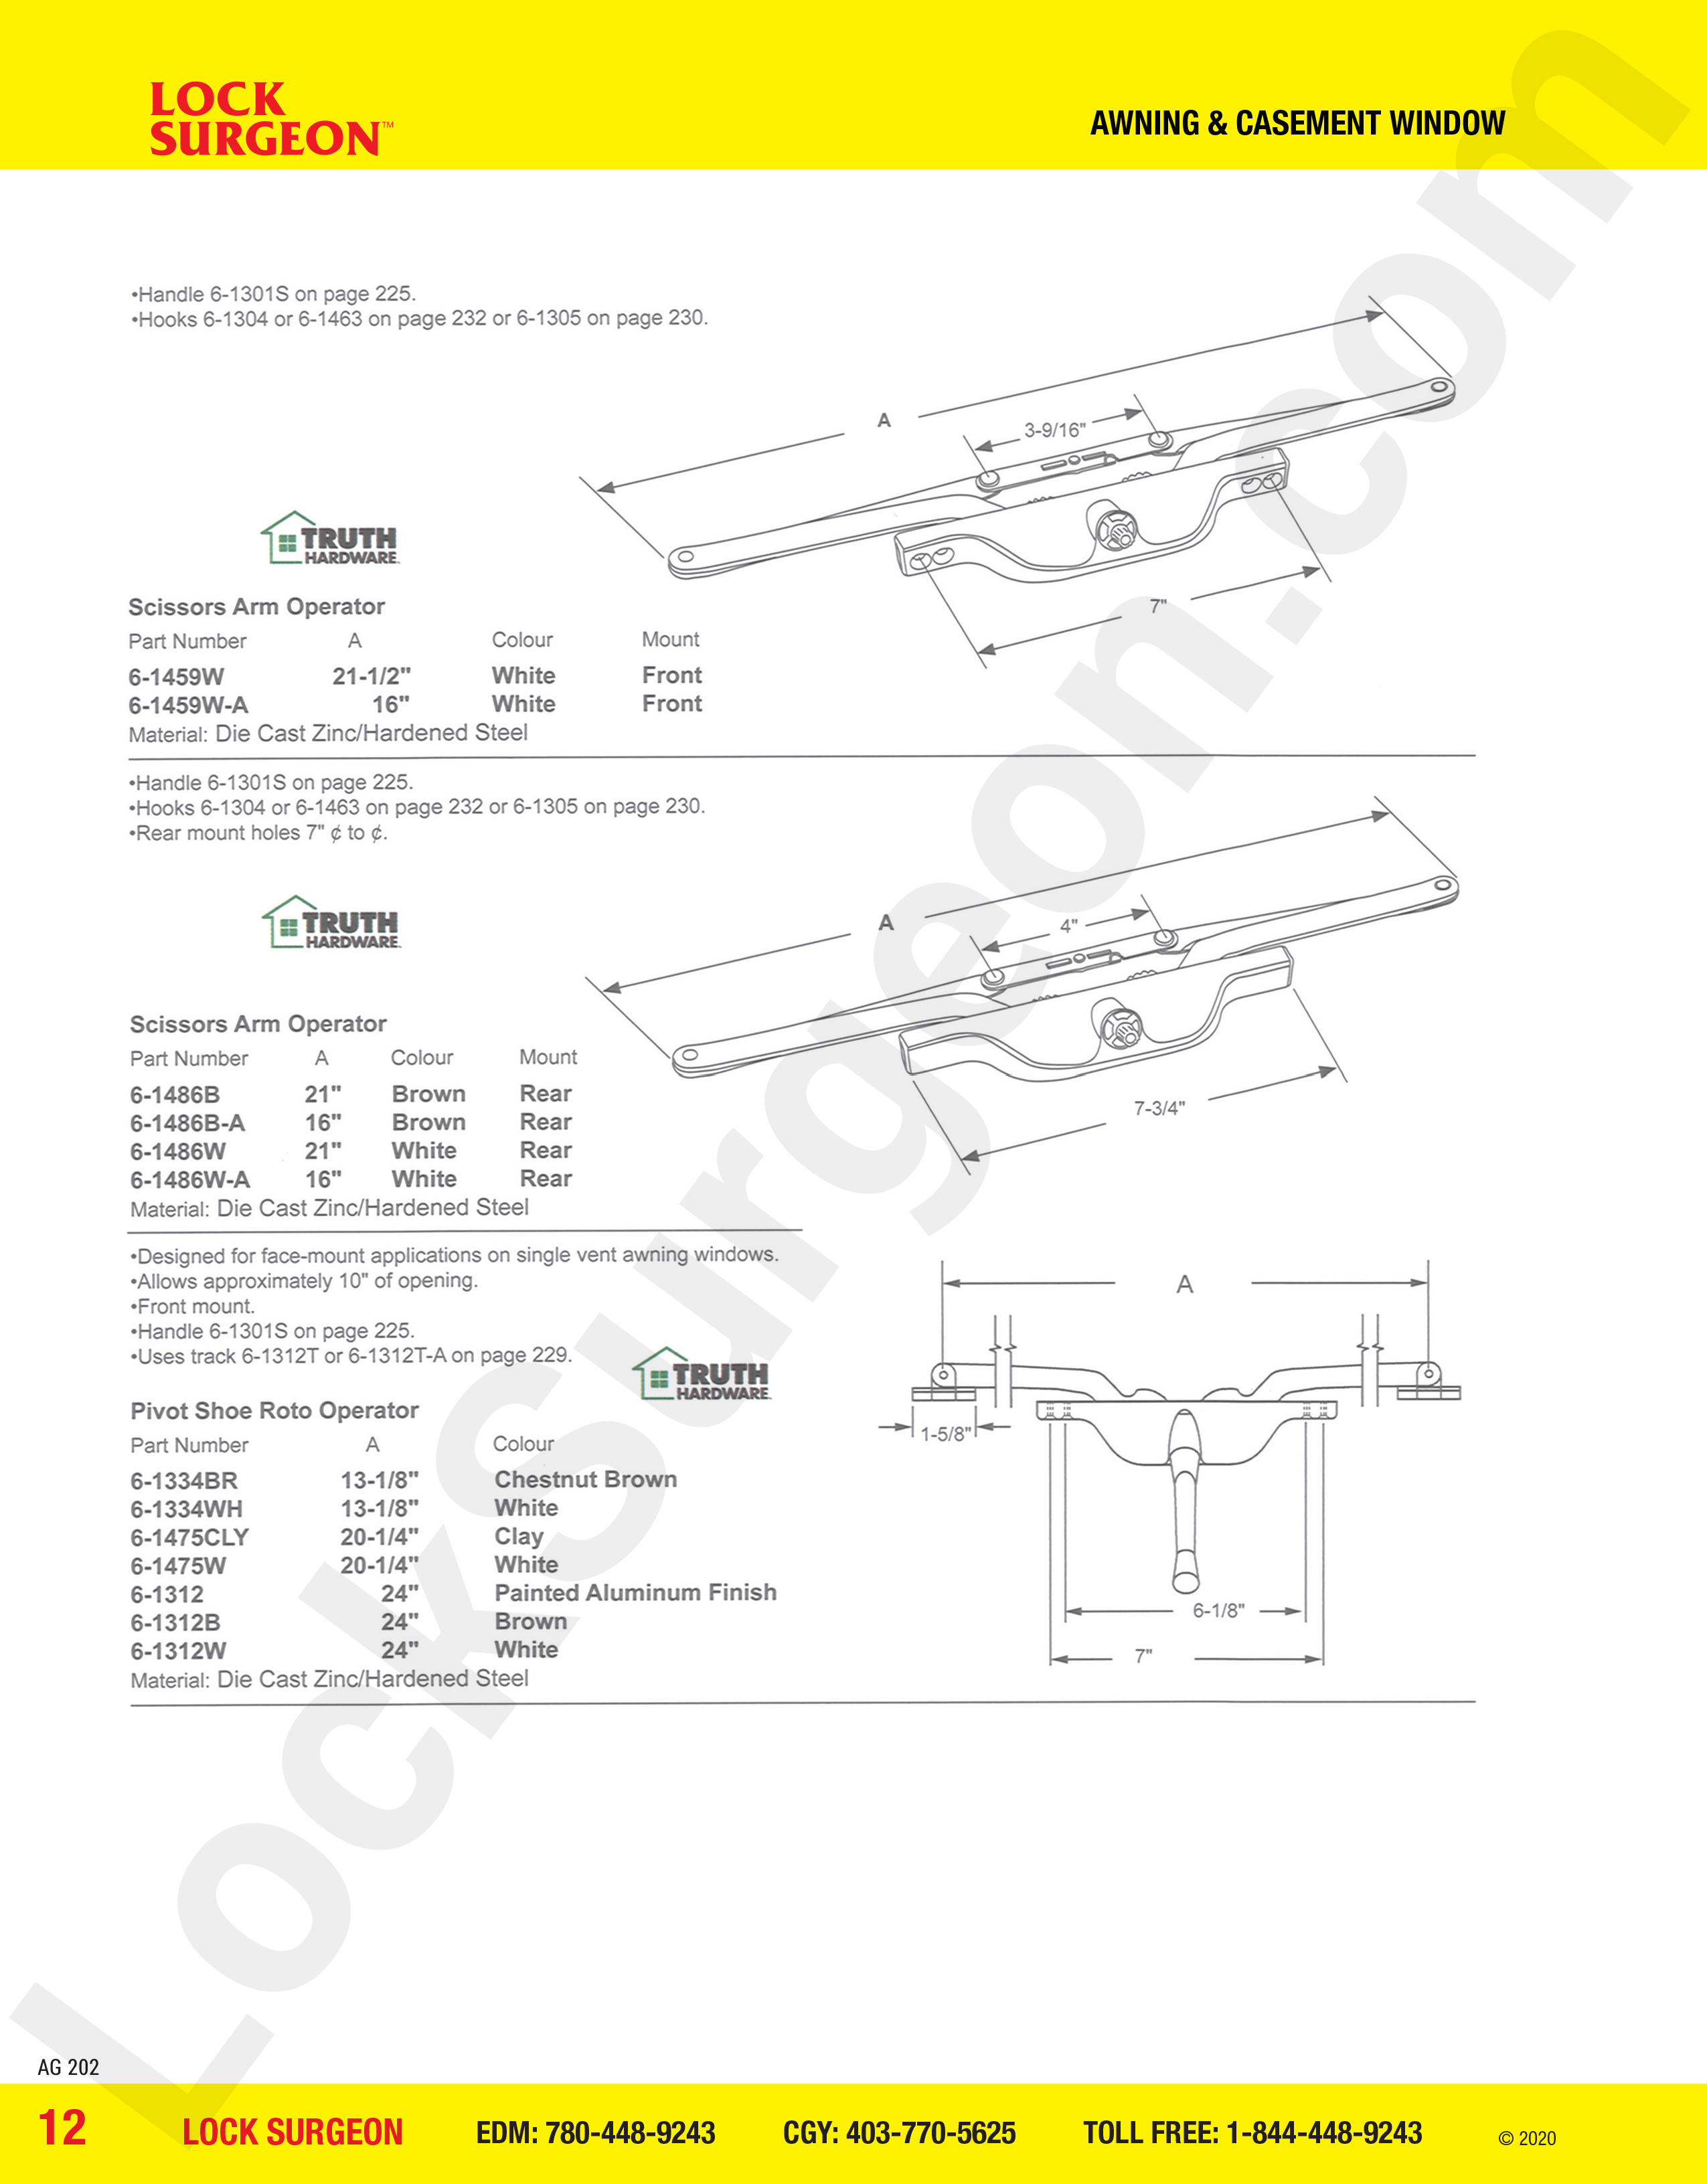 awning and casement window parts for ellipse operators Acheson mobile